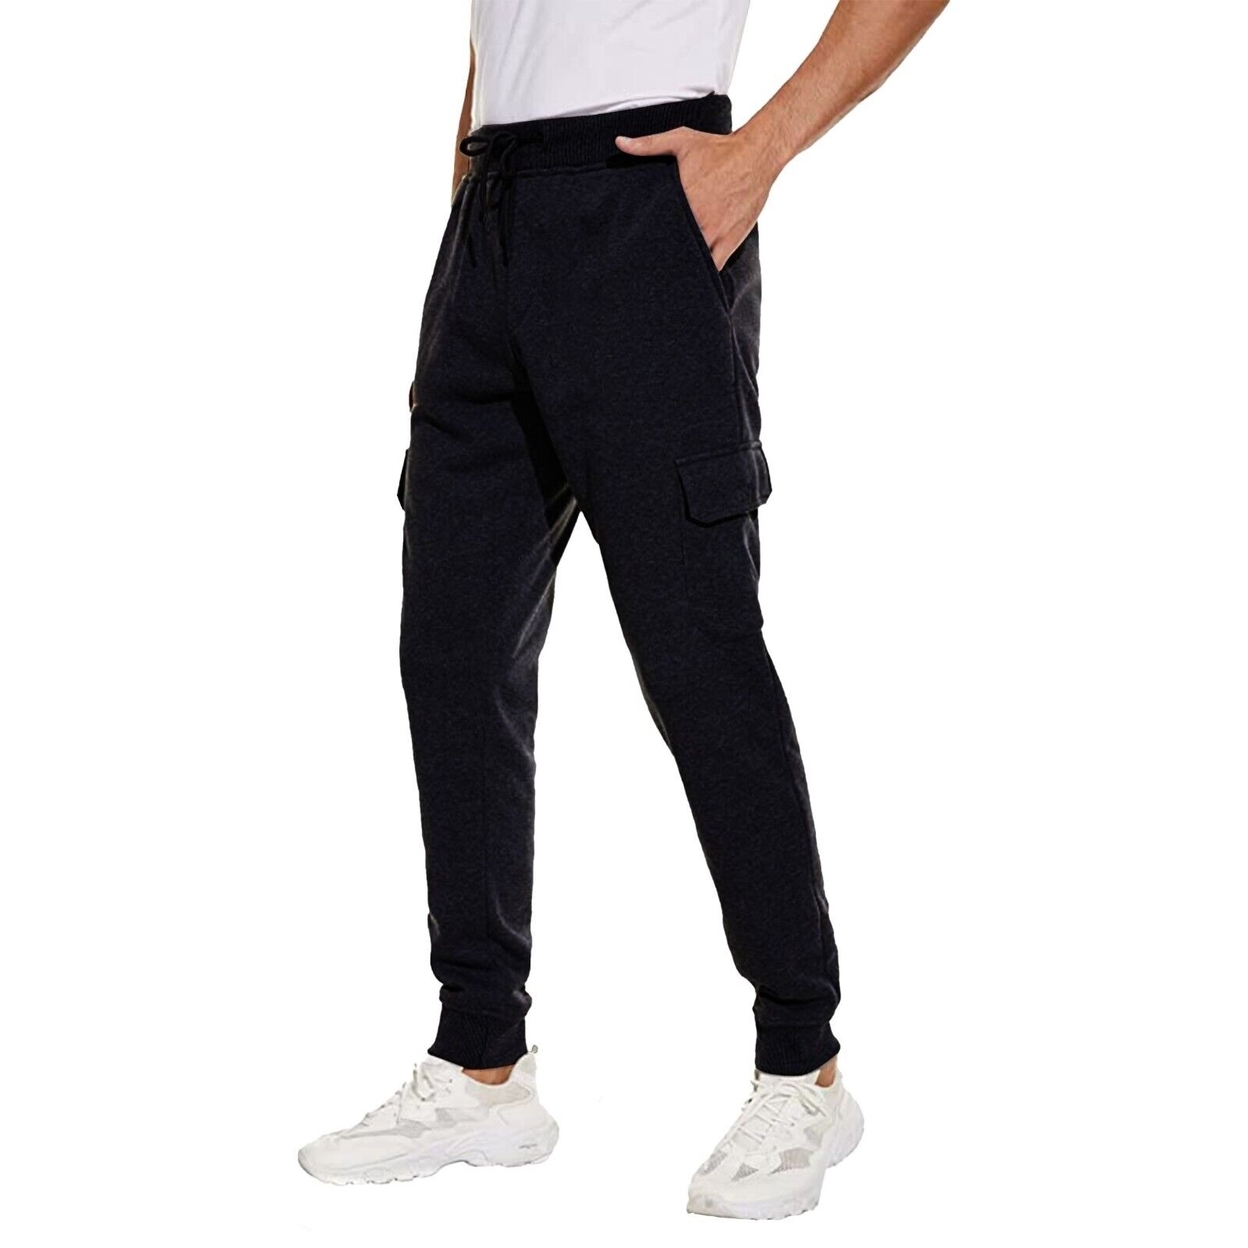 Men's Ultra Soft Winter Warm Thick Sweat Pant Athletic Sherpa Lined Jogger Pants - Navy, Medium